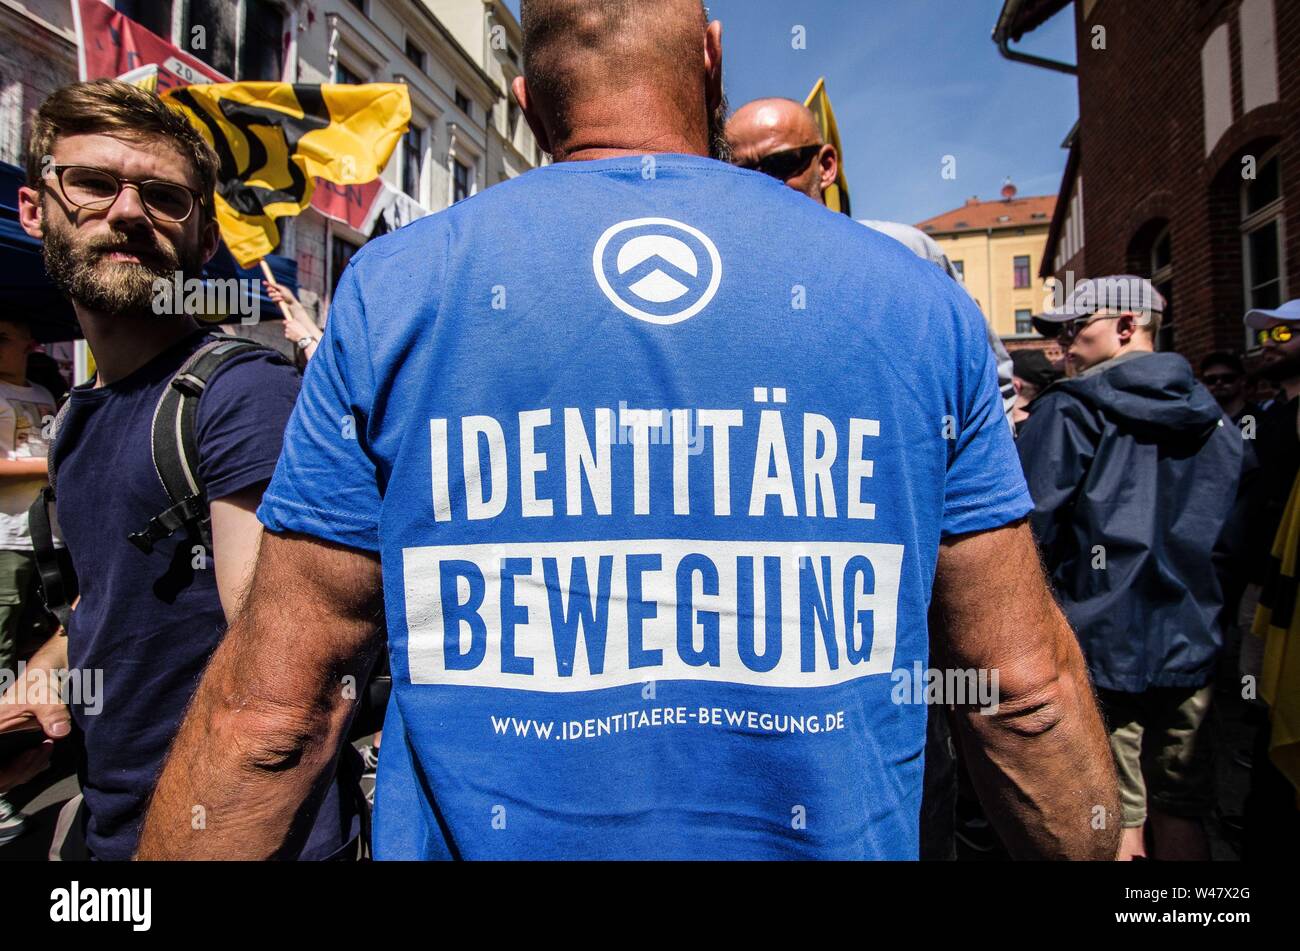 Halle Saale, Sachsen Anhalt, Germany. 20th July, 2019. Amid protests, the white supremacist, right extremist Identitaere Bewegung (Generation Identity, Identitaren Movement) held a rally in Halle (Saale). The Identitaere have recently faced numerous challenges, including raids to explore the connection of its head Martin Sellner to the Christ Church shooter, as well as in Germany where the IB was officially classified as 'right-extremist''. The group has renewed the use of the 'blood and soil'' (Blut und Boden) theories and espouses a 'great replacement'' of white people, which was Stock Photo